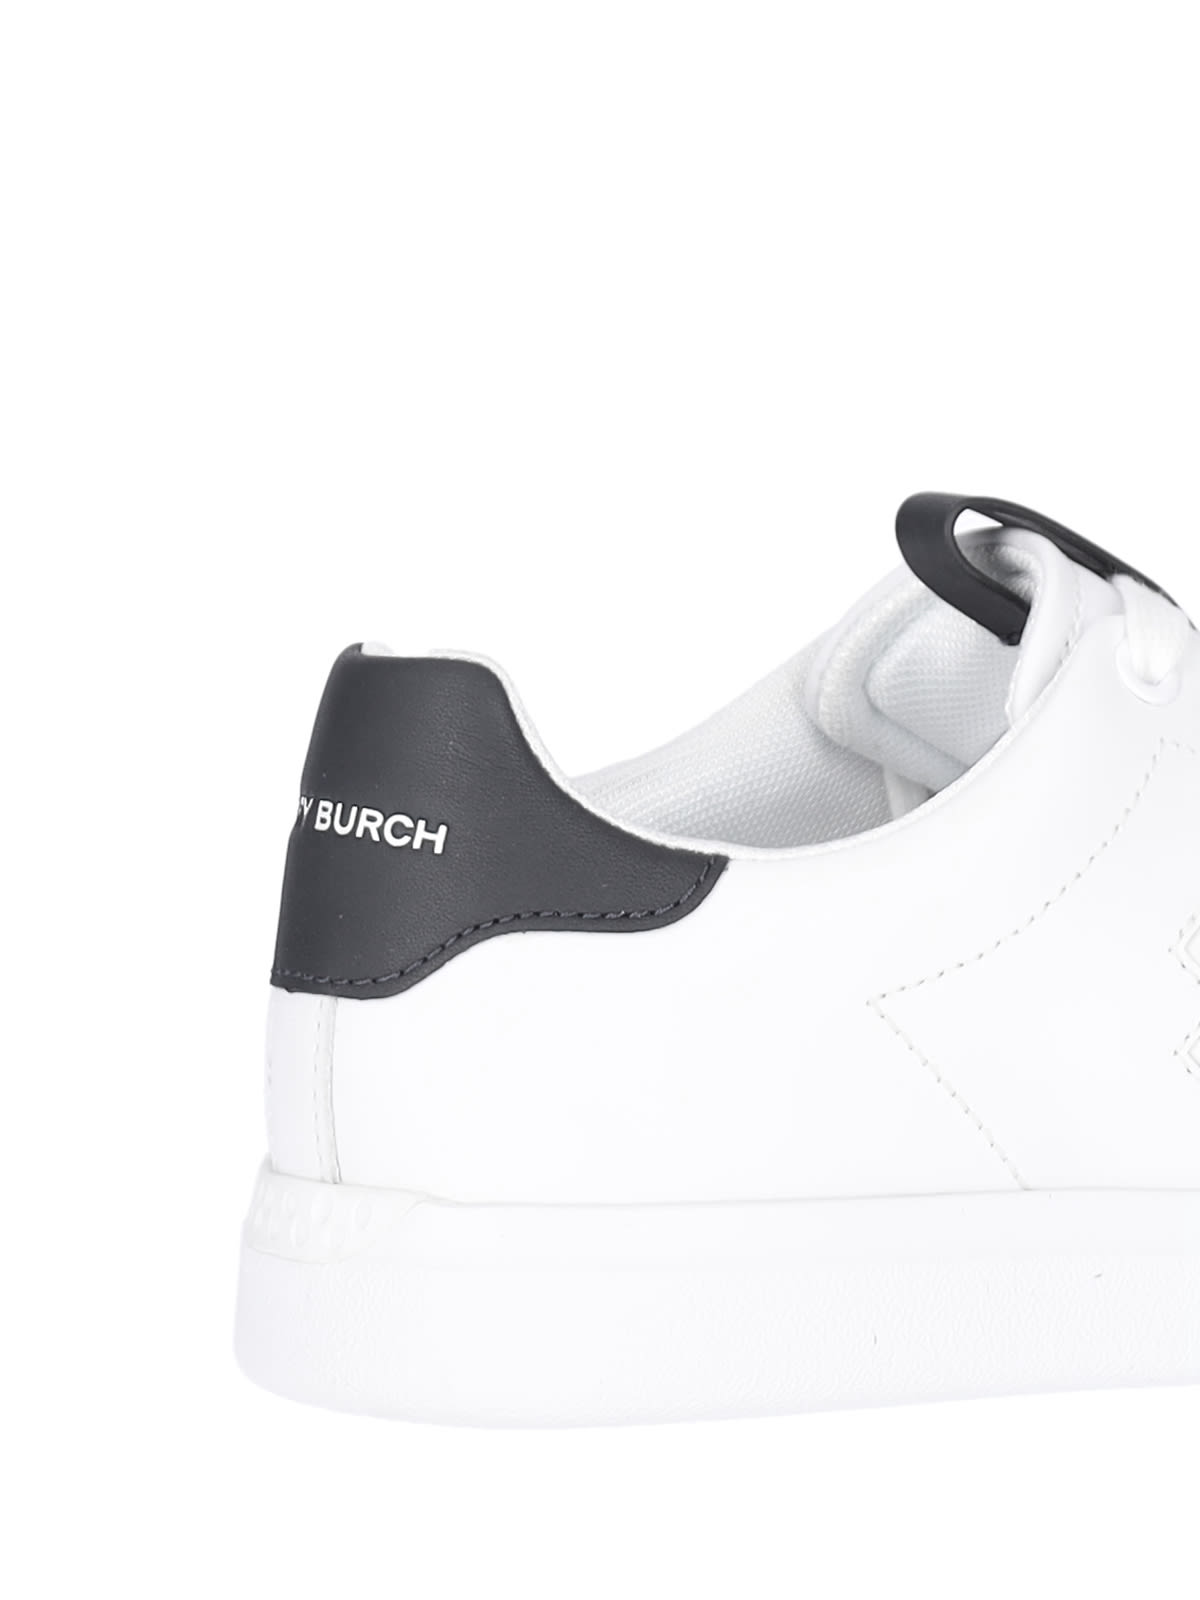 Shop Tory Burch Howell Sneakers In White